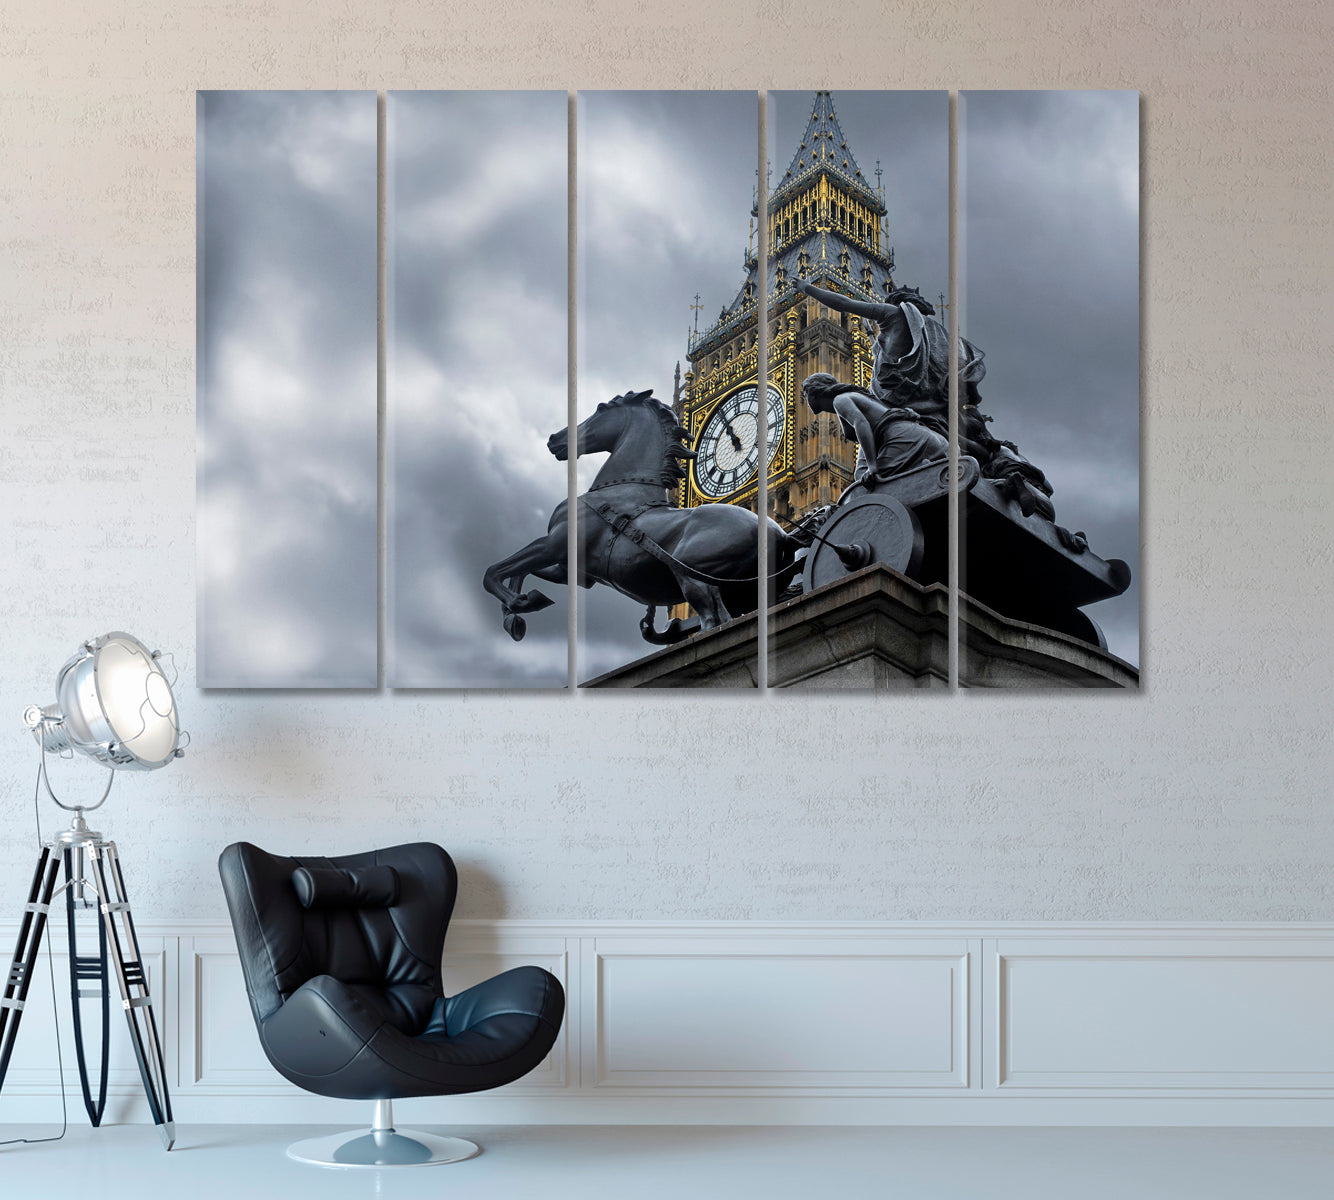 Big Ben and Boadicea Statue Canvas Print ArtLexy 5 Panels 36"x24" inches 